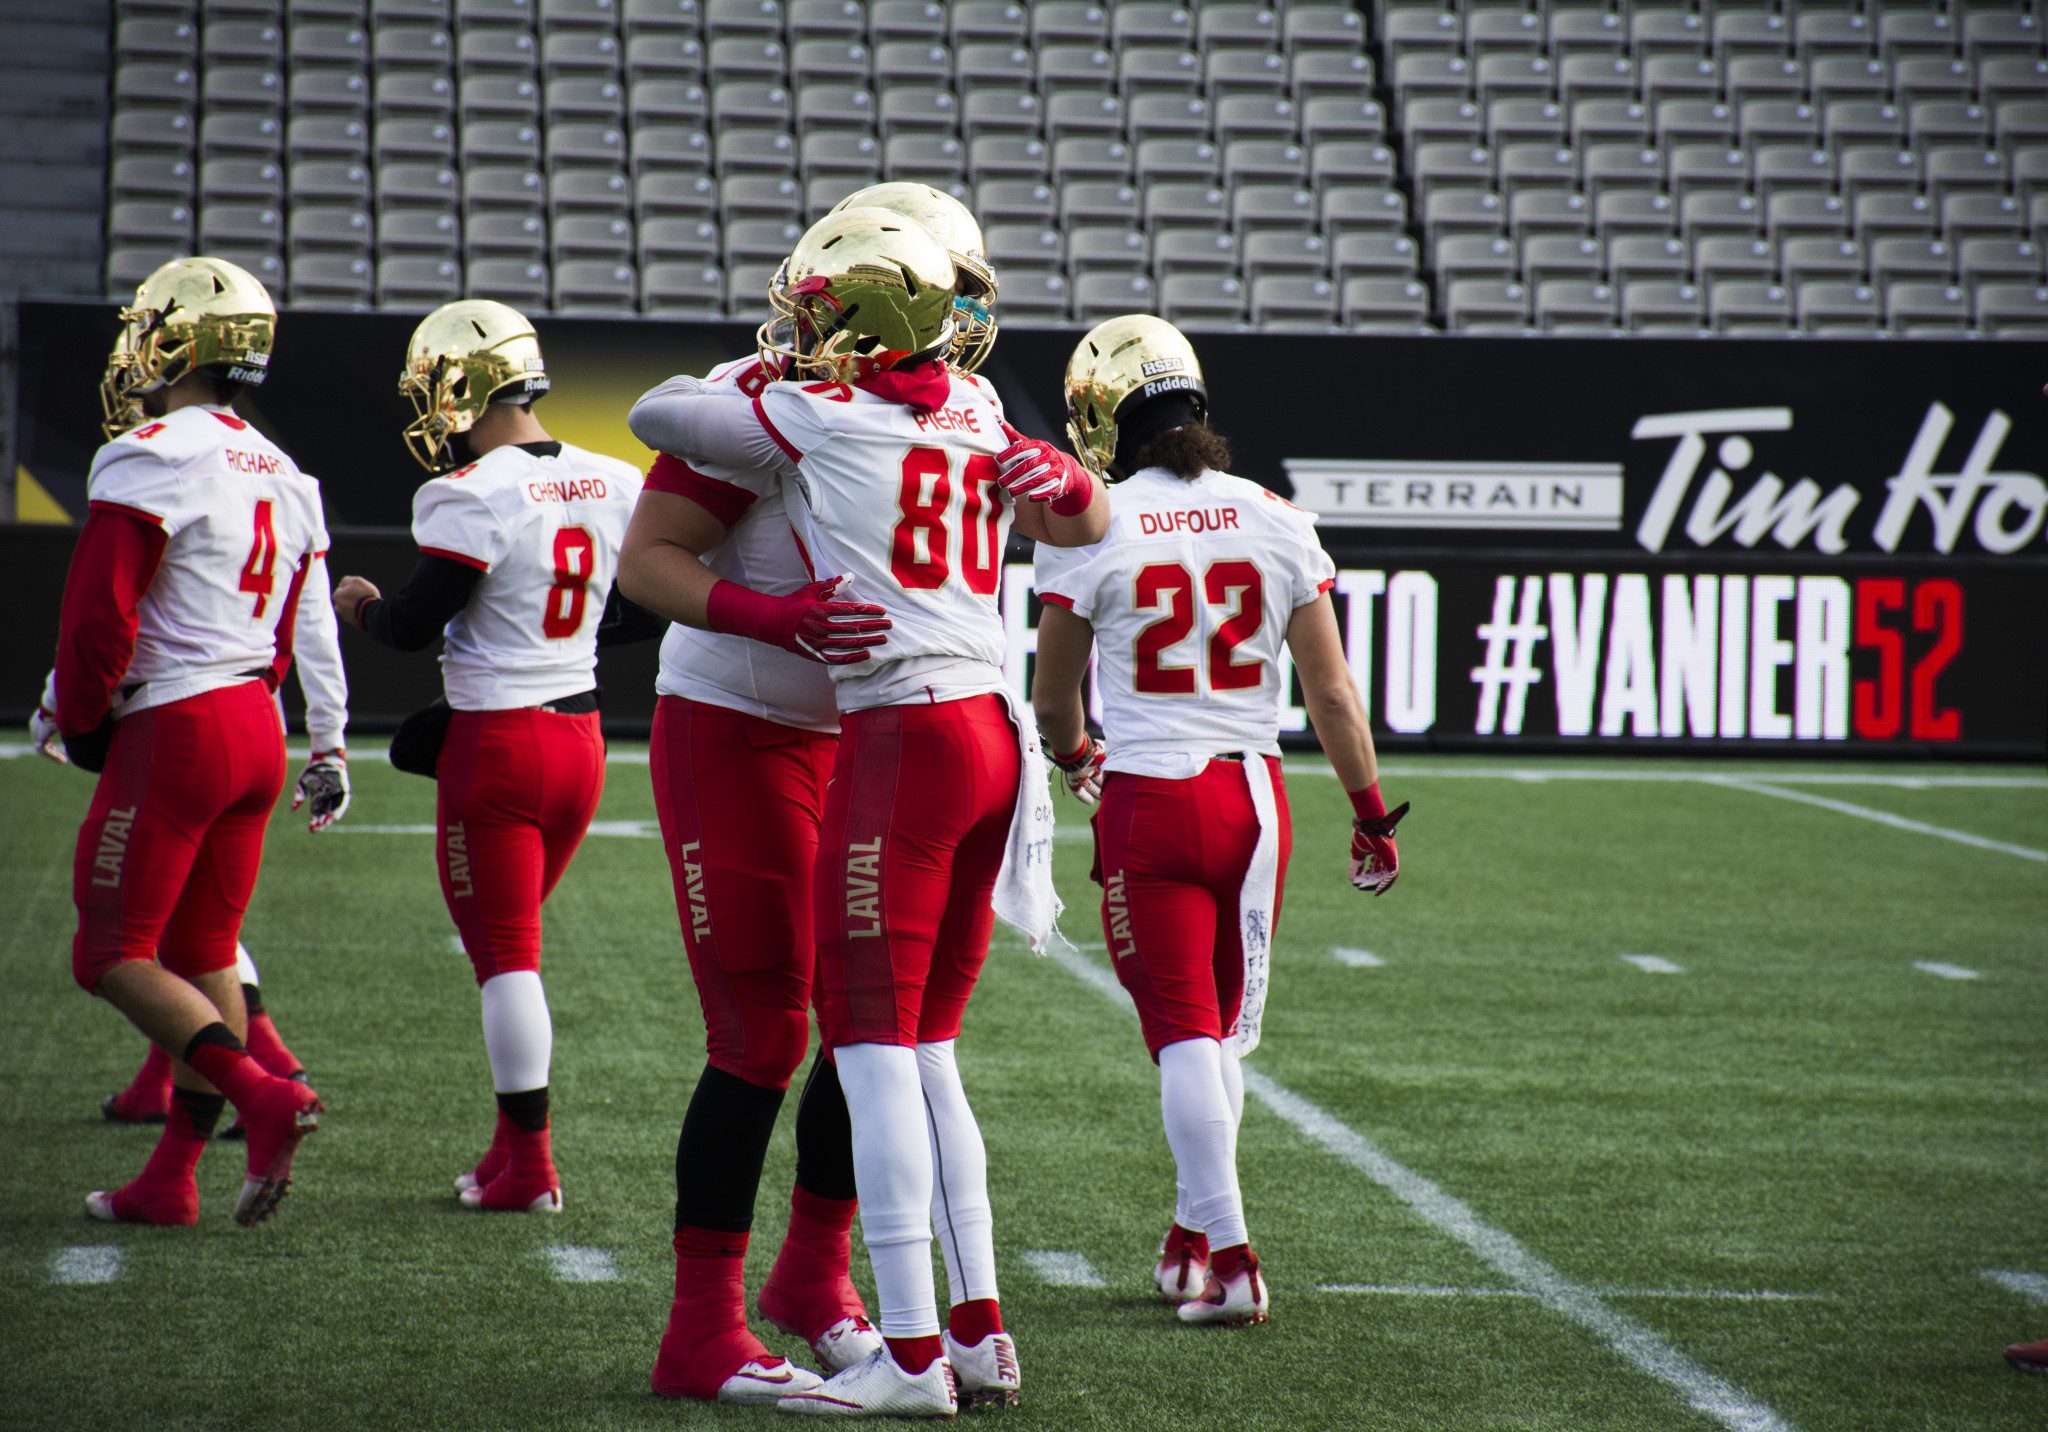 Laval players hugging